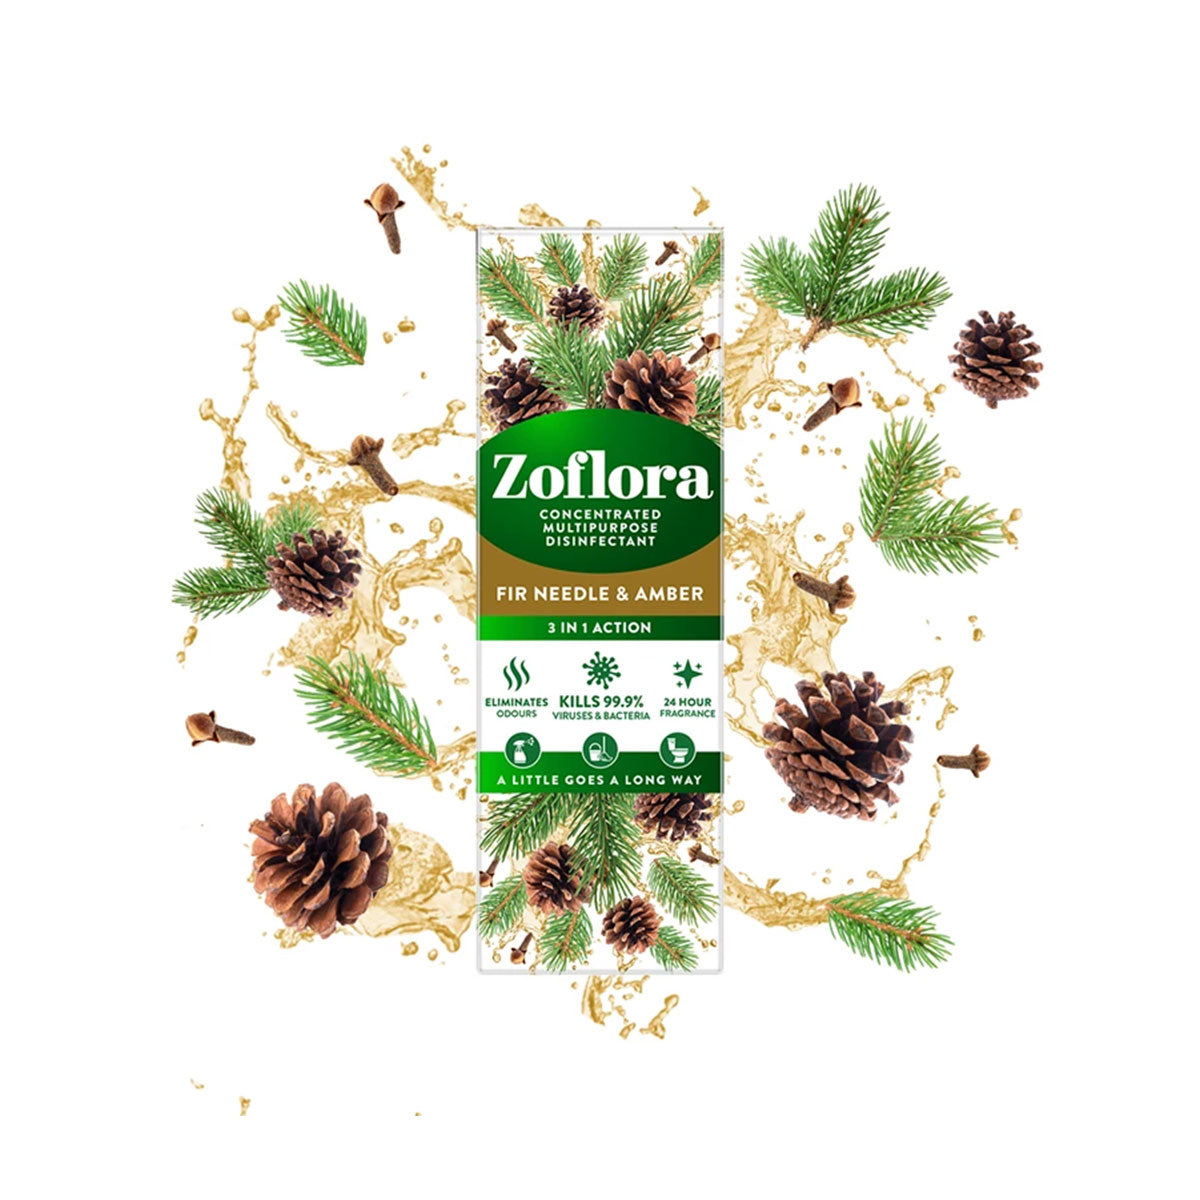 Zoflora Fir Needle & Amber 250ml, Concentrated 3-in-1 Multipurpose